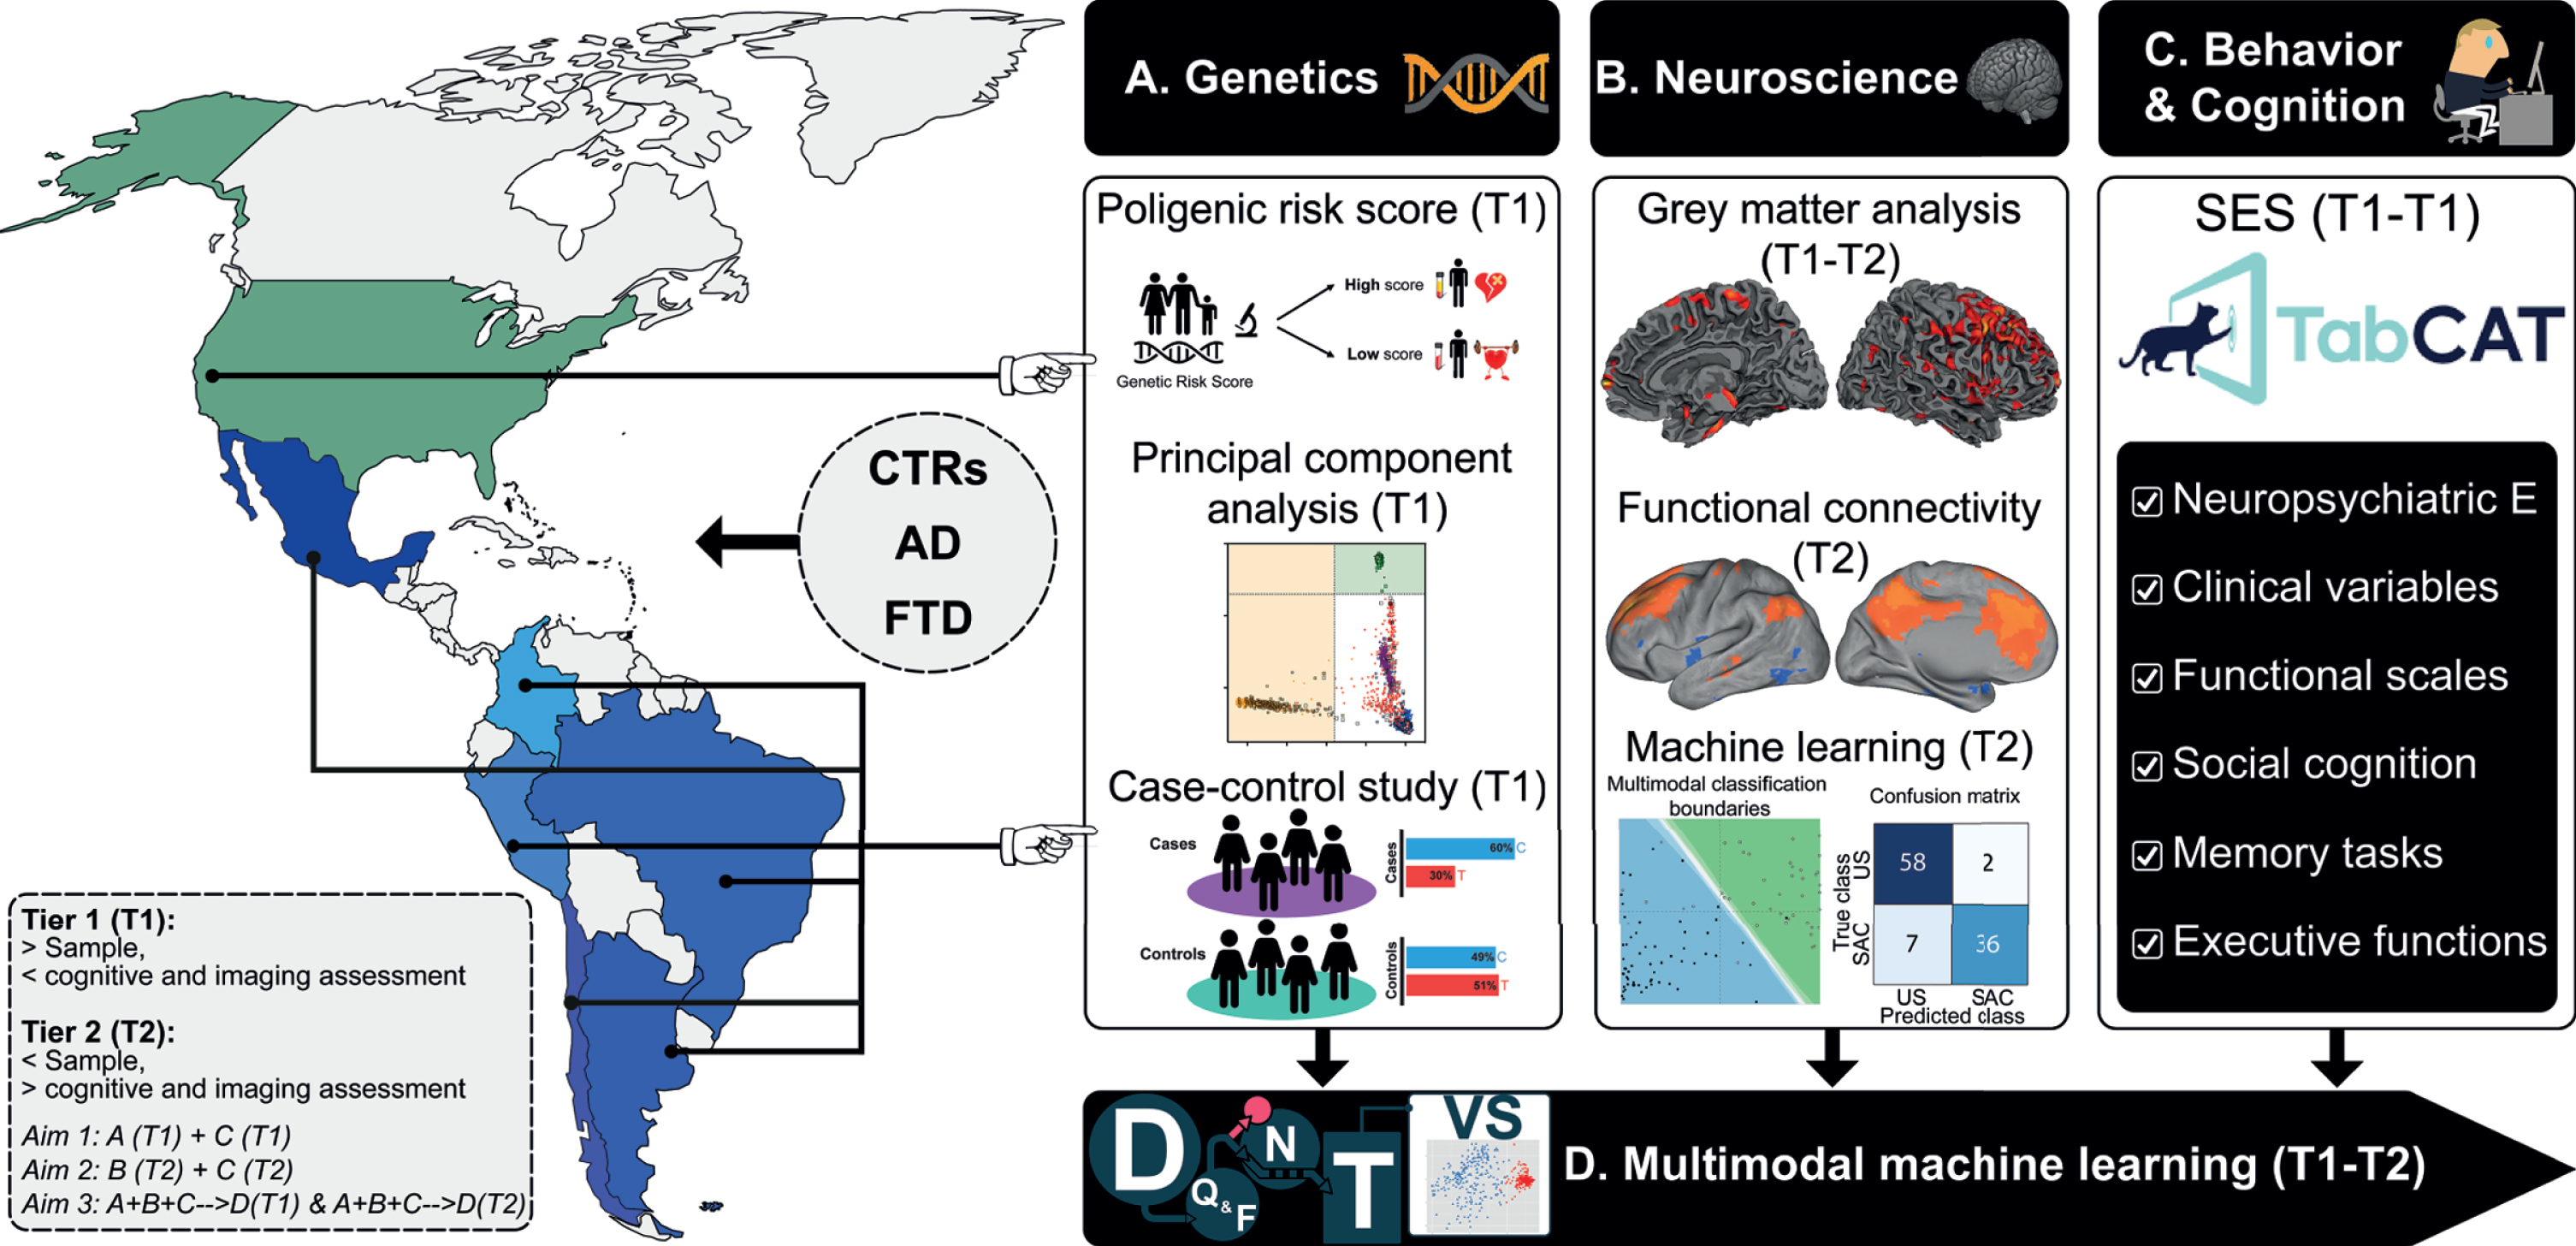 The ReDLat initiative. Systematic comparisons between LAC and US samples of AD and FTD via a novel, multimodal approach. The multimodal patterns will be assessed with different measures of (A) genetic risk (Aim 1), (B) imaging markers boosted by computational approaches, and (C) harmonized and novel measures of cognitive profiles and SES/SDH (Aim 2). These data sources will be (D) integrated and compared across countries through machine learning (Aim 3) to unveil the main commonalities and differences between US and LAC samples. Tier 1 (T1): Larger study (Aim 1 &3). Tier 2 (T2, smaller study with deep neurocognitive investigation (Aim 2 & 3). D, data; Q&F, quality & feature extraction; N, normalization; T, test; VS, visualization.